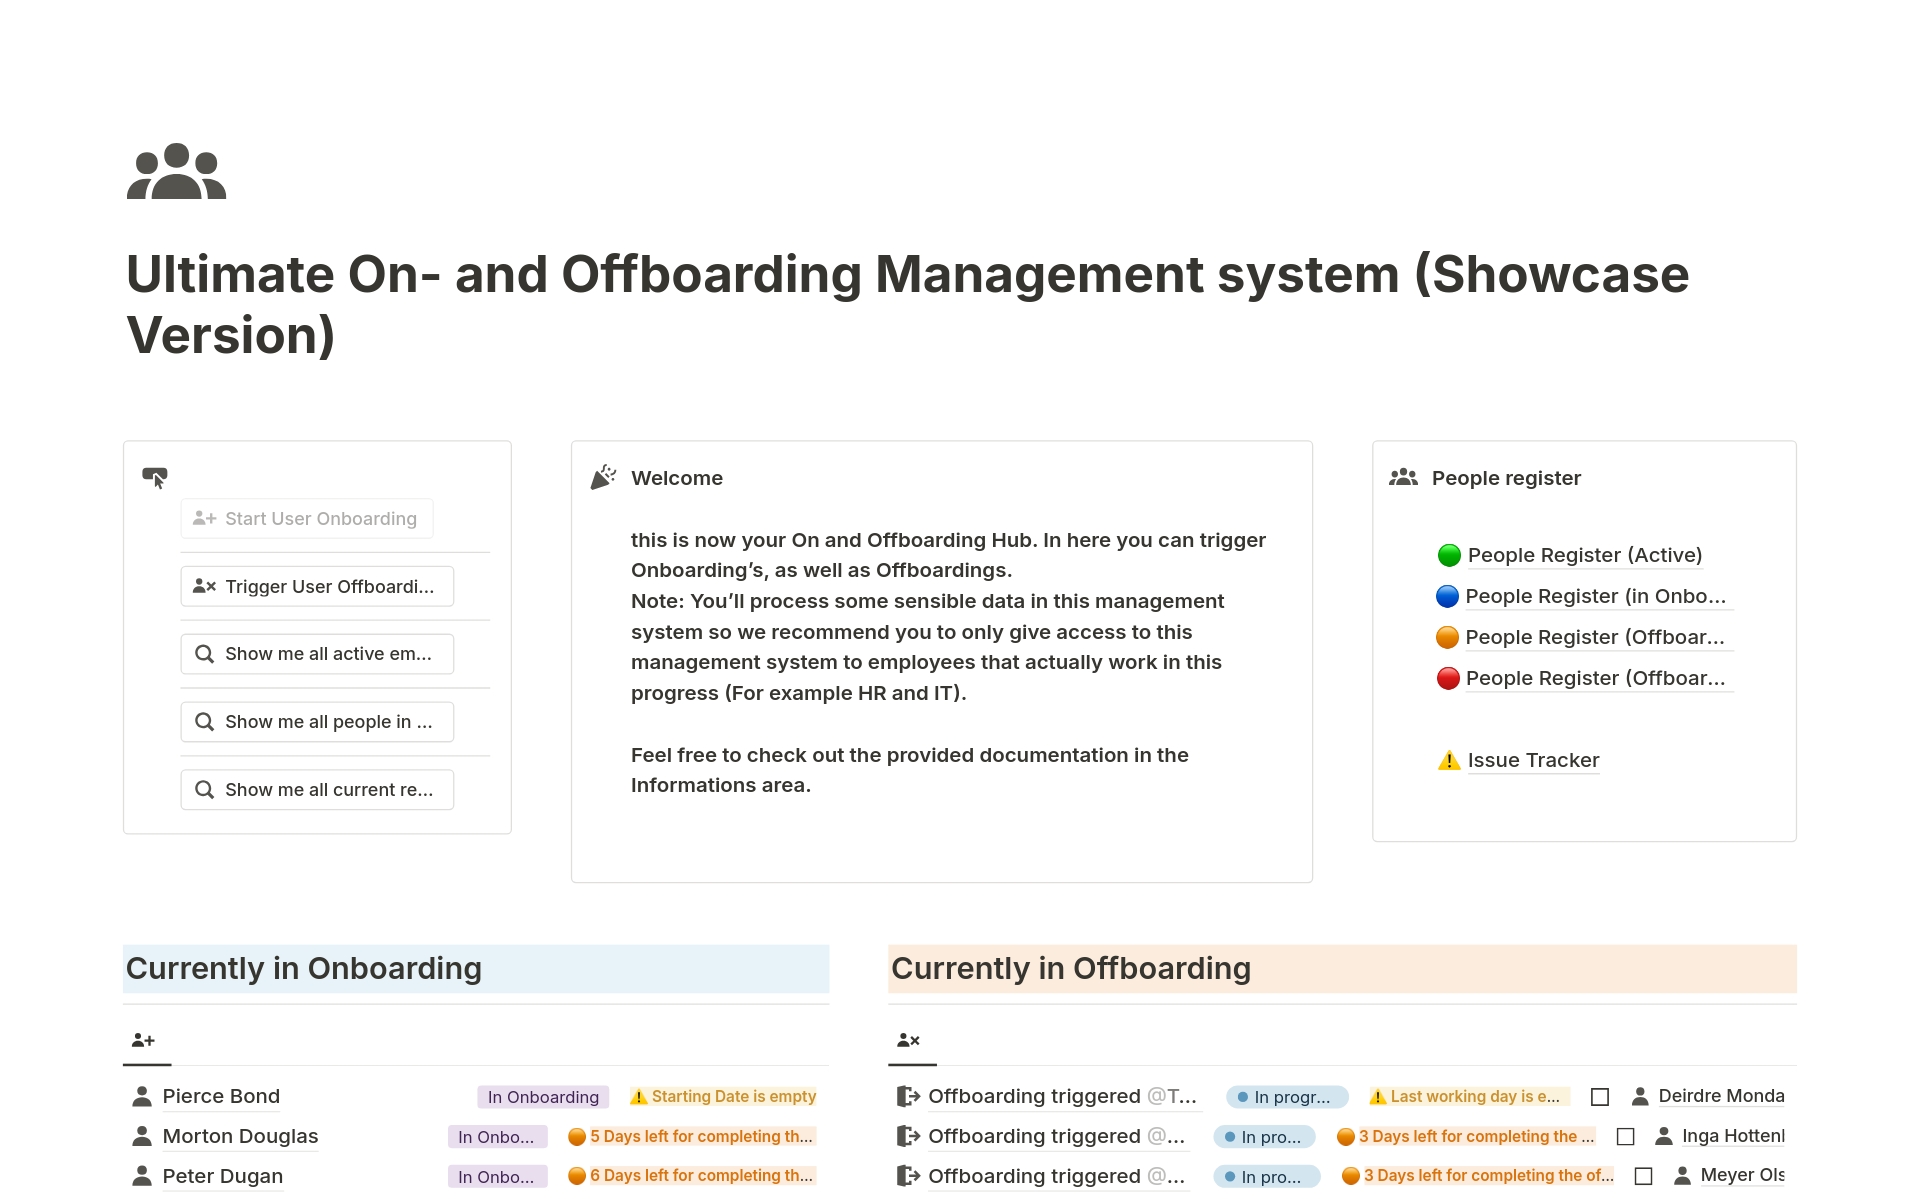 Introducing our yet most complex Notion Management System
On and Offboarding Management System in Notion 🚀